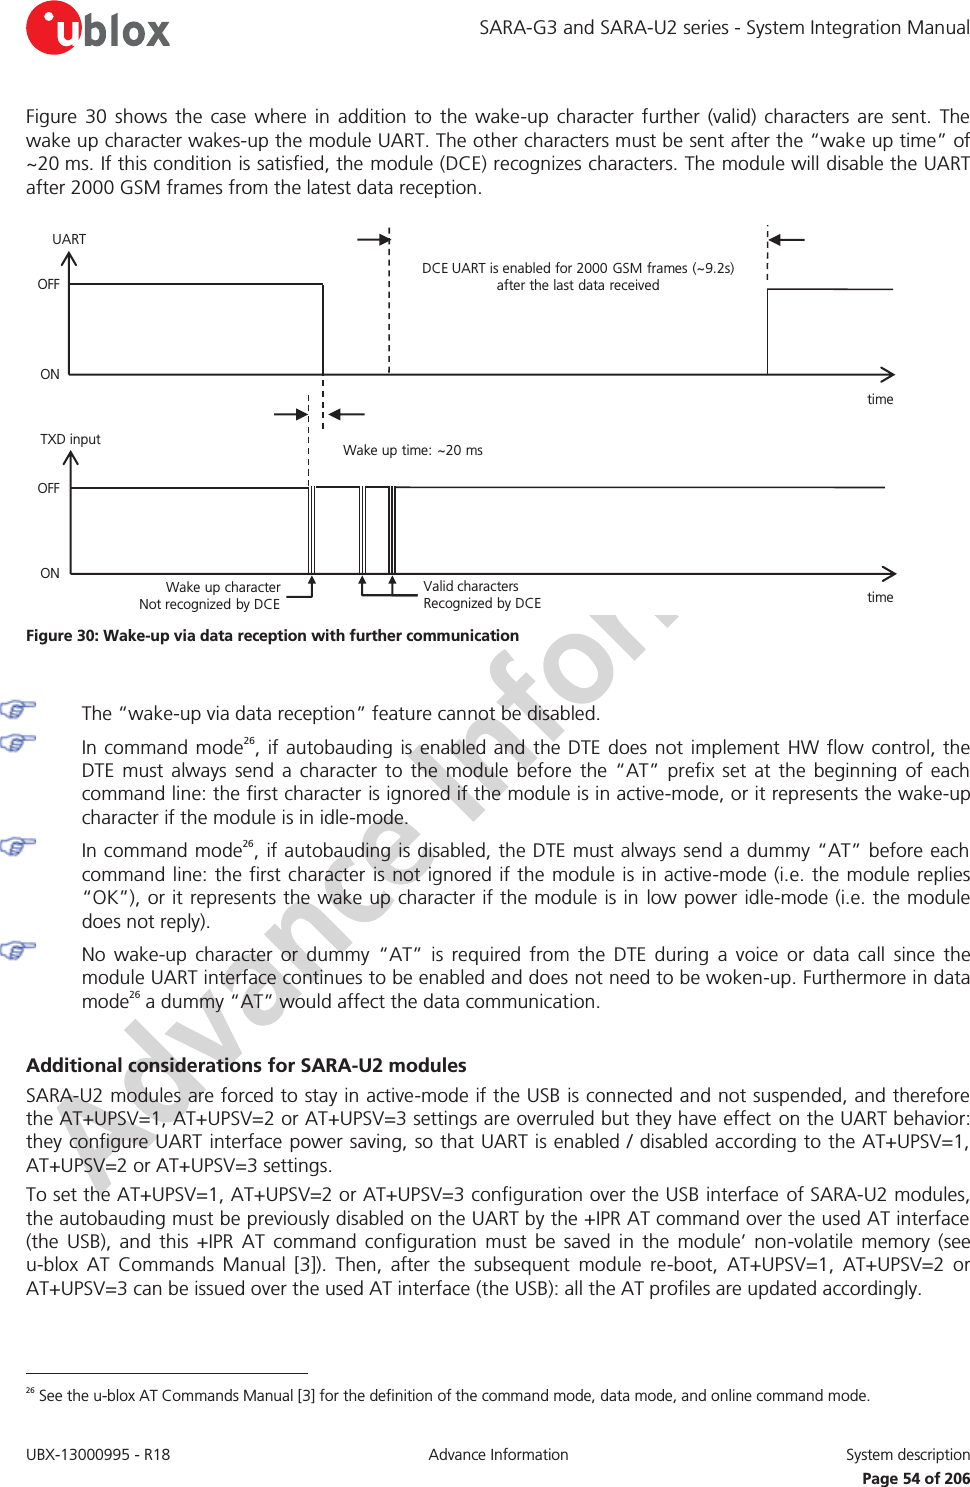 SARA-G3 and SARA-U2 series - System Integration Manual UBX-13000995 - R18  Advance Information  System description   Page 54 of 206 Figure 30 shows the case where in addition to the wake-up character further (valid) characters are sent. The wake up character wakes-up the module UART. The other characters must be sent after the “wake up time” of ~20 ms. If this condition is satisfied, the module (DCE) recognizes characters. The module will disable the UART after 2000 GSM frames from the latest data reception. DCE UART is enabled for 2000 GSM frames (~9.2s) after the last data receivedtime Wake up time: ~20 mstime Wake up character        Not recognized by DCEValid characters          Recognized by DCEOFFONTXD inputUARTOFFON Figure 30: Wake-up via data reception with further communication   The “wake-up via data reception” feature cannot be disabled.  In command mode26, if autobauding is enabled and the DTE does not implement HW flow control, the DTE must always send a character to the module before the “AT” prefix set at the beginning of each command line: the first character is ignored if the module is in active-mode, or it represents the wake-up character if the module is in idle-mode.  In command mode26, if autobauding is disabled, the DTE must always send a dummy “AT” before each command line: the first character is not ignored if the module is in active-mode (i.e. the module replies “OK”), or it represents the wake up character if the module is in low power idle-mode (i.e. the module does not reply).  No wake-up character or dummy “AT” is required from the DTE during a voice or data call since the module UART interface continues to be enabled and does not need to be woken-up. Furthermore in data mode26 a dummy “AT” would affect the data communication.  Additional considerations for SARA-U2 modules SARA-U2 modules are forced to stay in active-mode if the USB is connected and not suspended, and therefore the AT+UPSV=1, AT+UPSV=2 or AT+UPSV=3 settings are overruled but they have effect on the UART behavior: they configure UART interface power saving, so that UART is enabled / disabled according to the AT+UPSV=1, AT+UPSV=2 or AT+UPSV=3 settings. To set the AT+UPSV=1, AT+UPSV=2 or AT+UPSV=3 configuration over the USB interface of SARA-U2 modules, the autobauding must be previously disabled on the UART by the +IPR AT command over the used AT interface (the USB), and this +IPR AT command configuration must be saved in the module’ non-volatile memory (see u-blox AT Commands Manual [3]). Then, after the subsequent module re-boot, AT+UPSV=1, AT+UPSV=2 or AT+UPSV=3 can be issued over the used AT interface (the USB): all the AT profiles are updated accordingly.                                                        26 See the u-blox AT Commands Manual [3] for the definition of the command mode, data mode, and online command mode. 